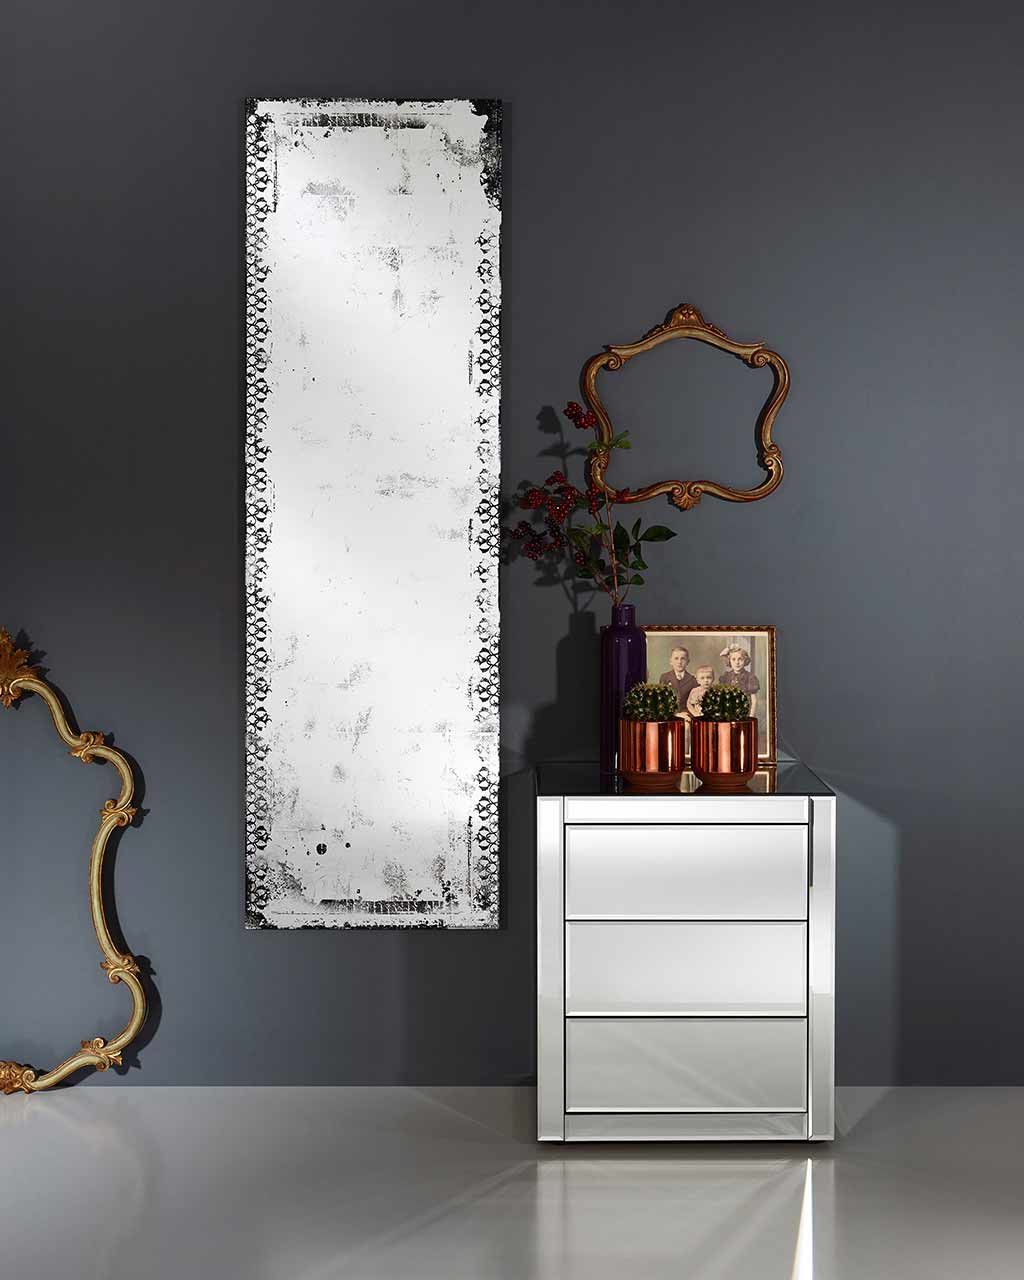 Favorite Mirrordeco — Large Full Length Wall Mirror – Distressed Glass Finish Throughout Large Full Length Wall Mirrors (View 8 of 20)